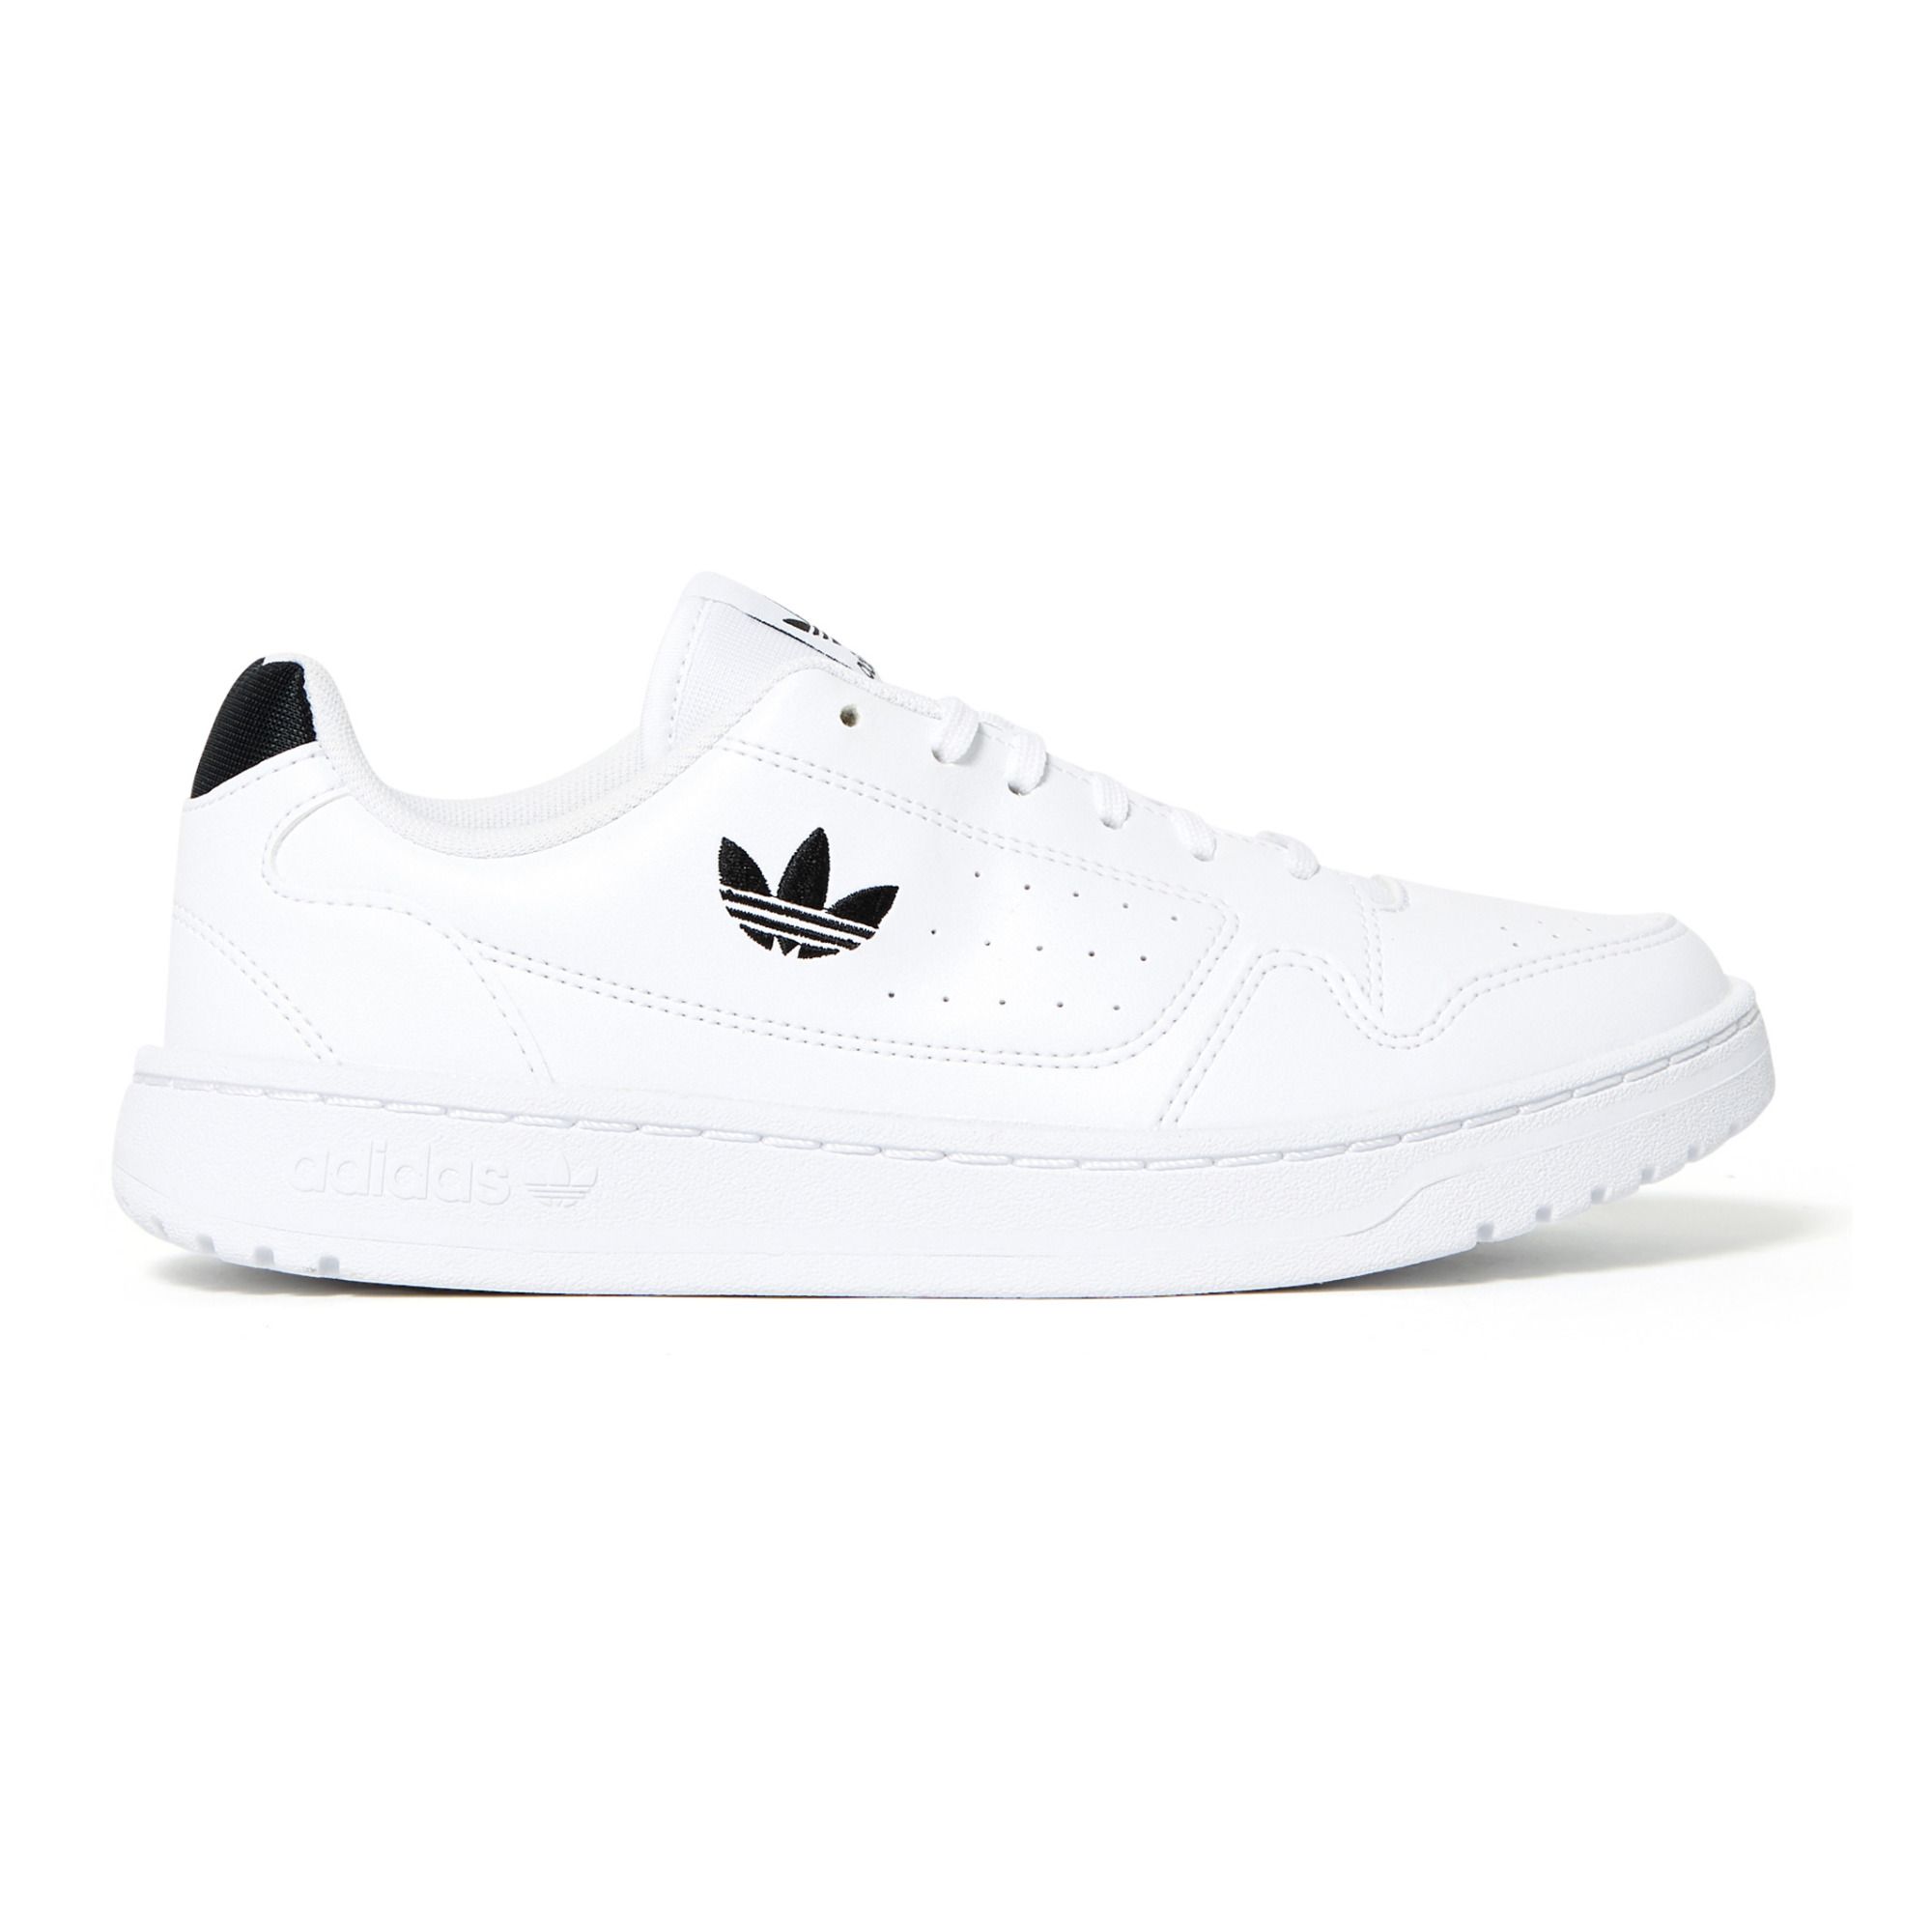 Adidas - Baskets Lacets NY90 - Fille - Blanc